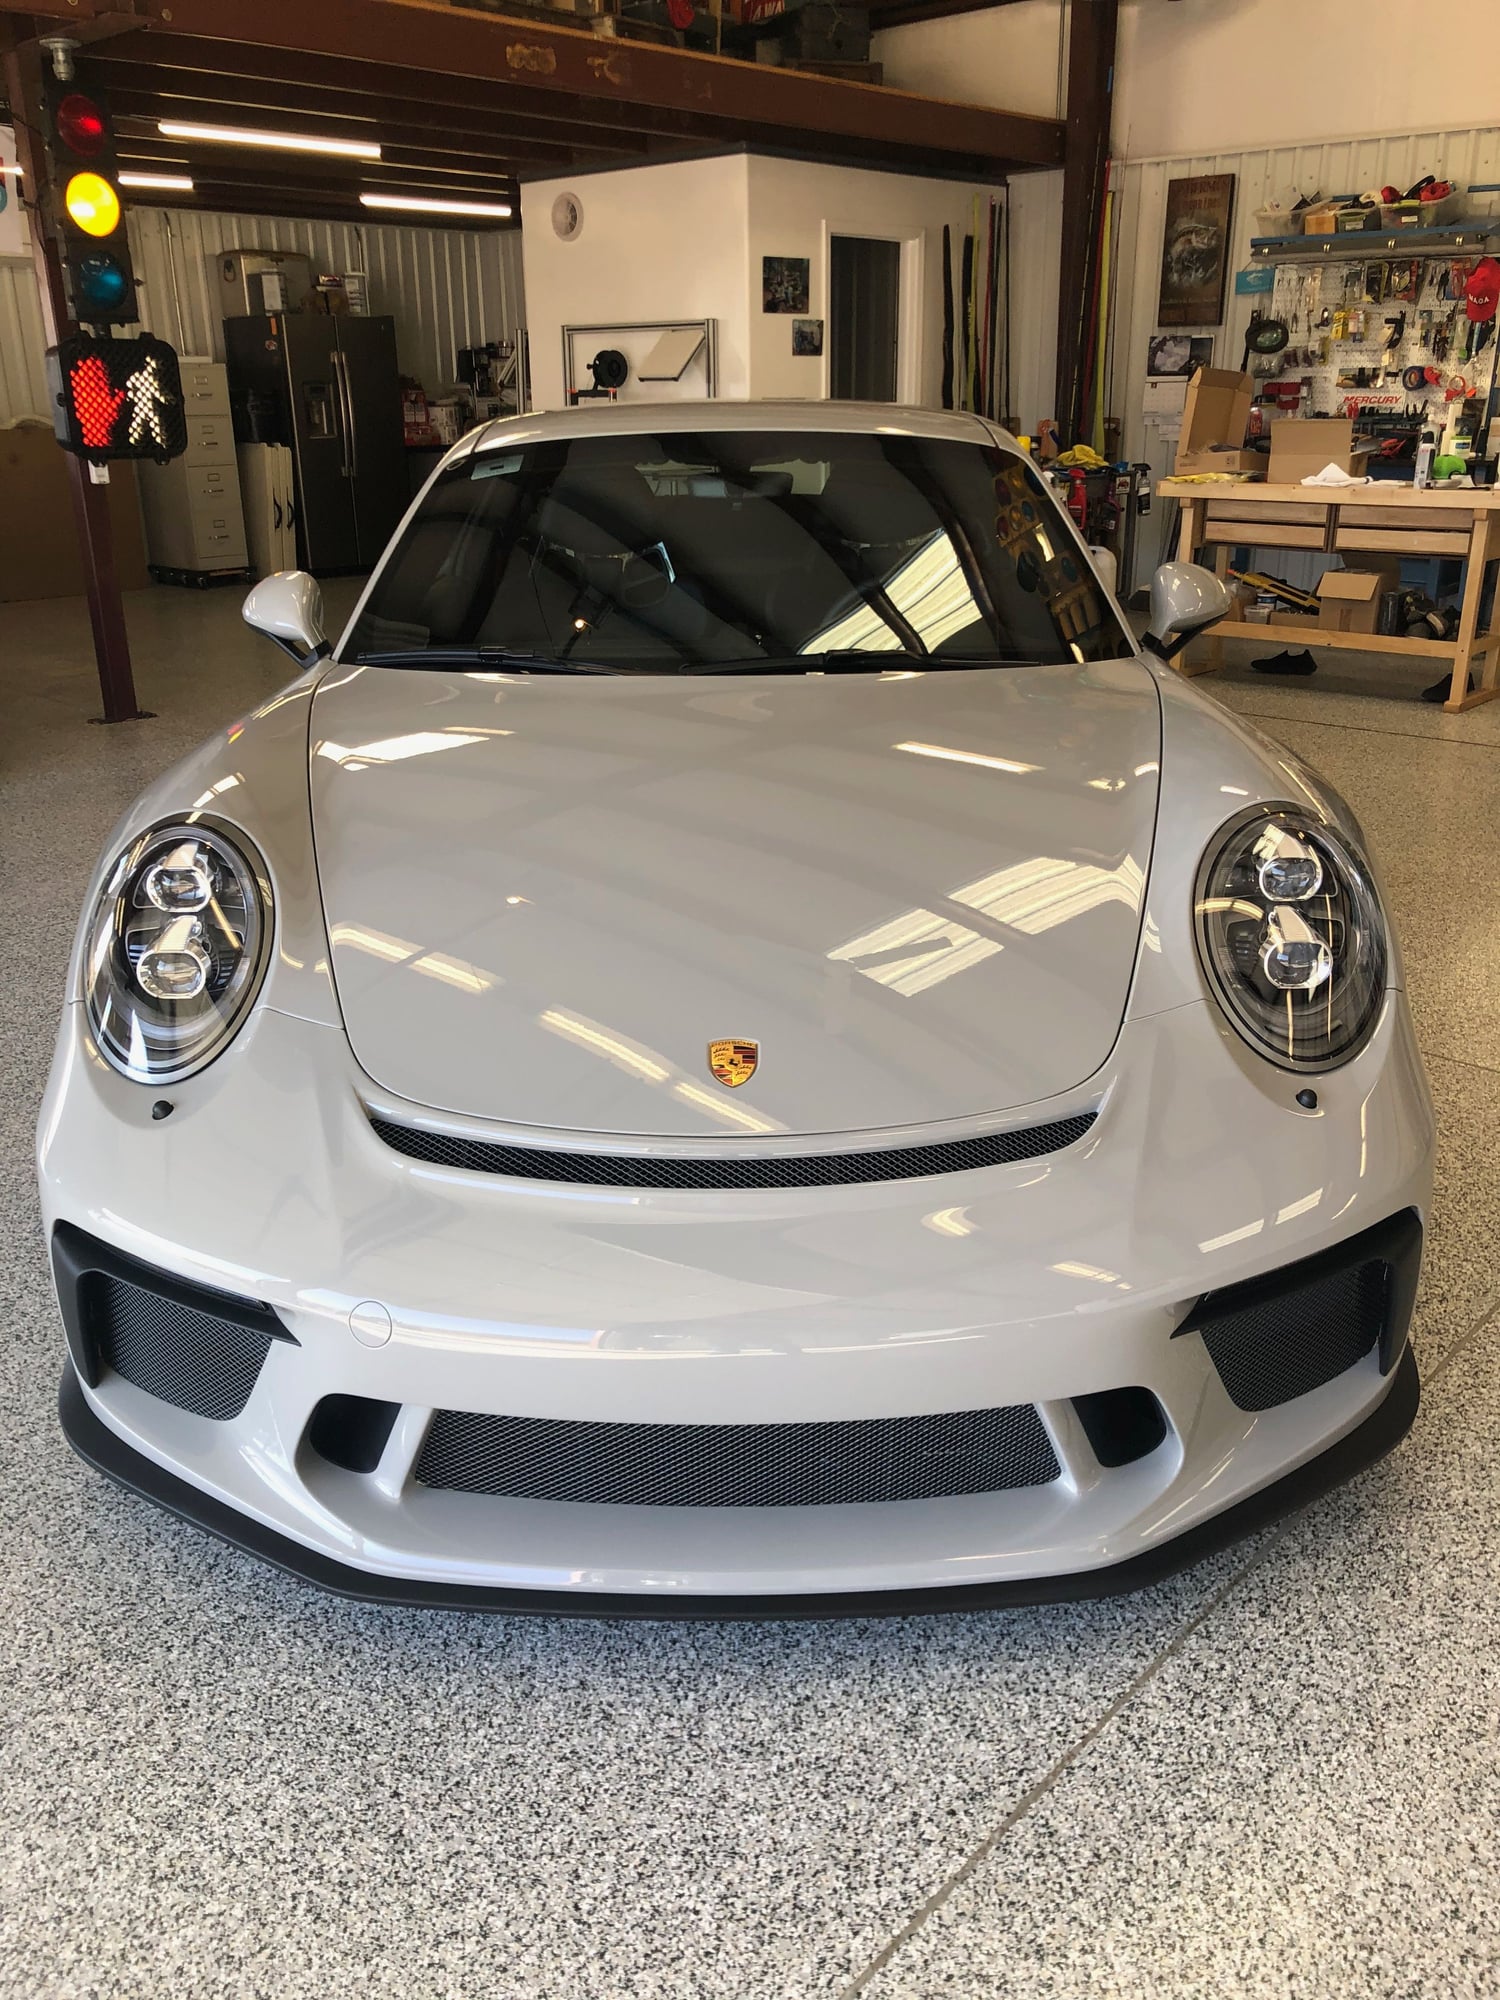 2018 Porsche GT3 - 2018 911 Chalk GT3 Touring SOLD - Used - VIN wp0ac2a92js176977 - 5,450 Miles - 6 cyl - 2WD - Automatic - Coupe - Other - Mesa, AZ 85205, United States